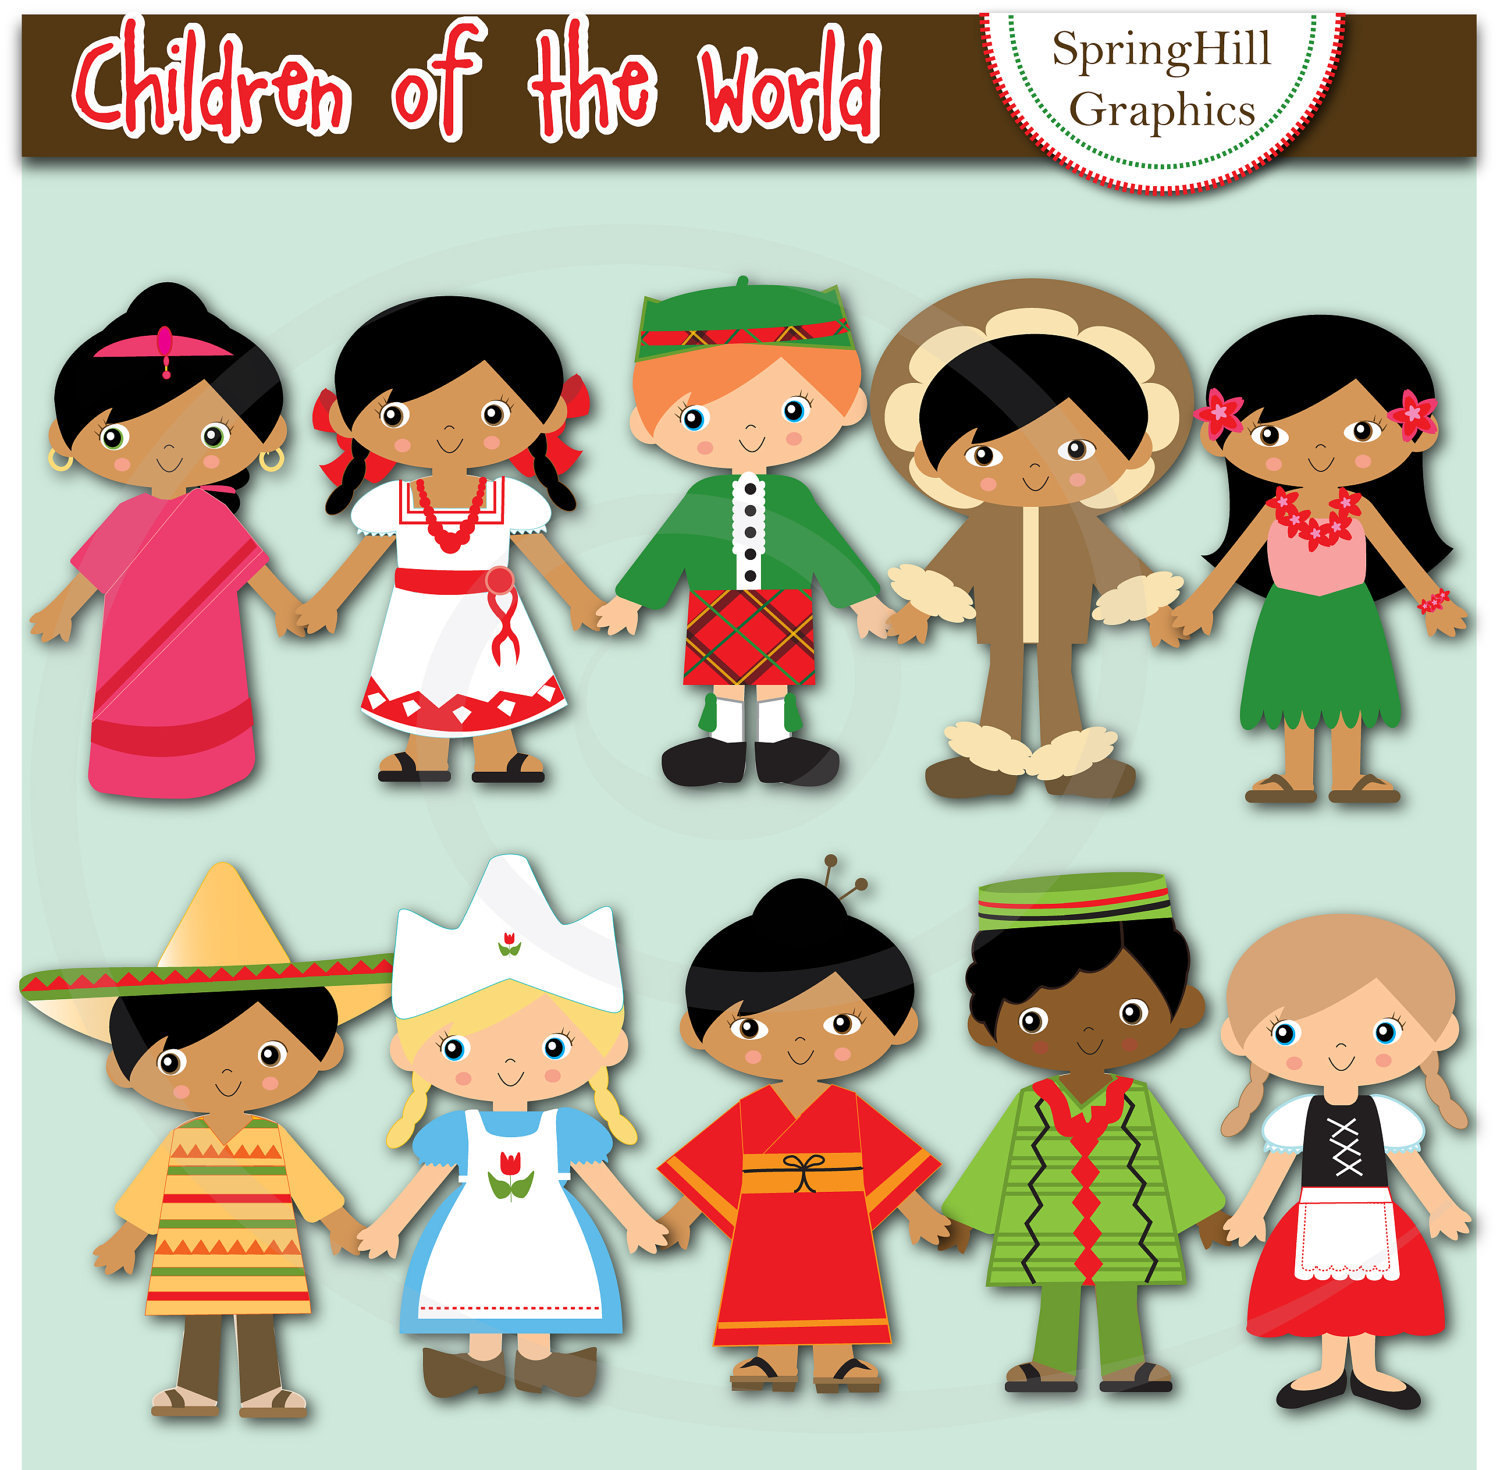 children from the world - Clip Art Library